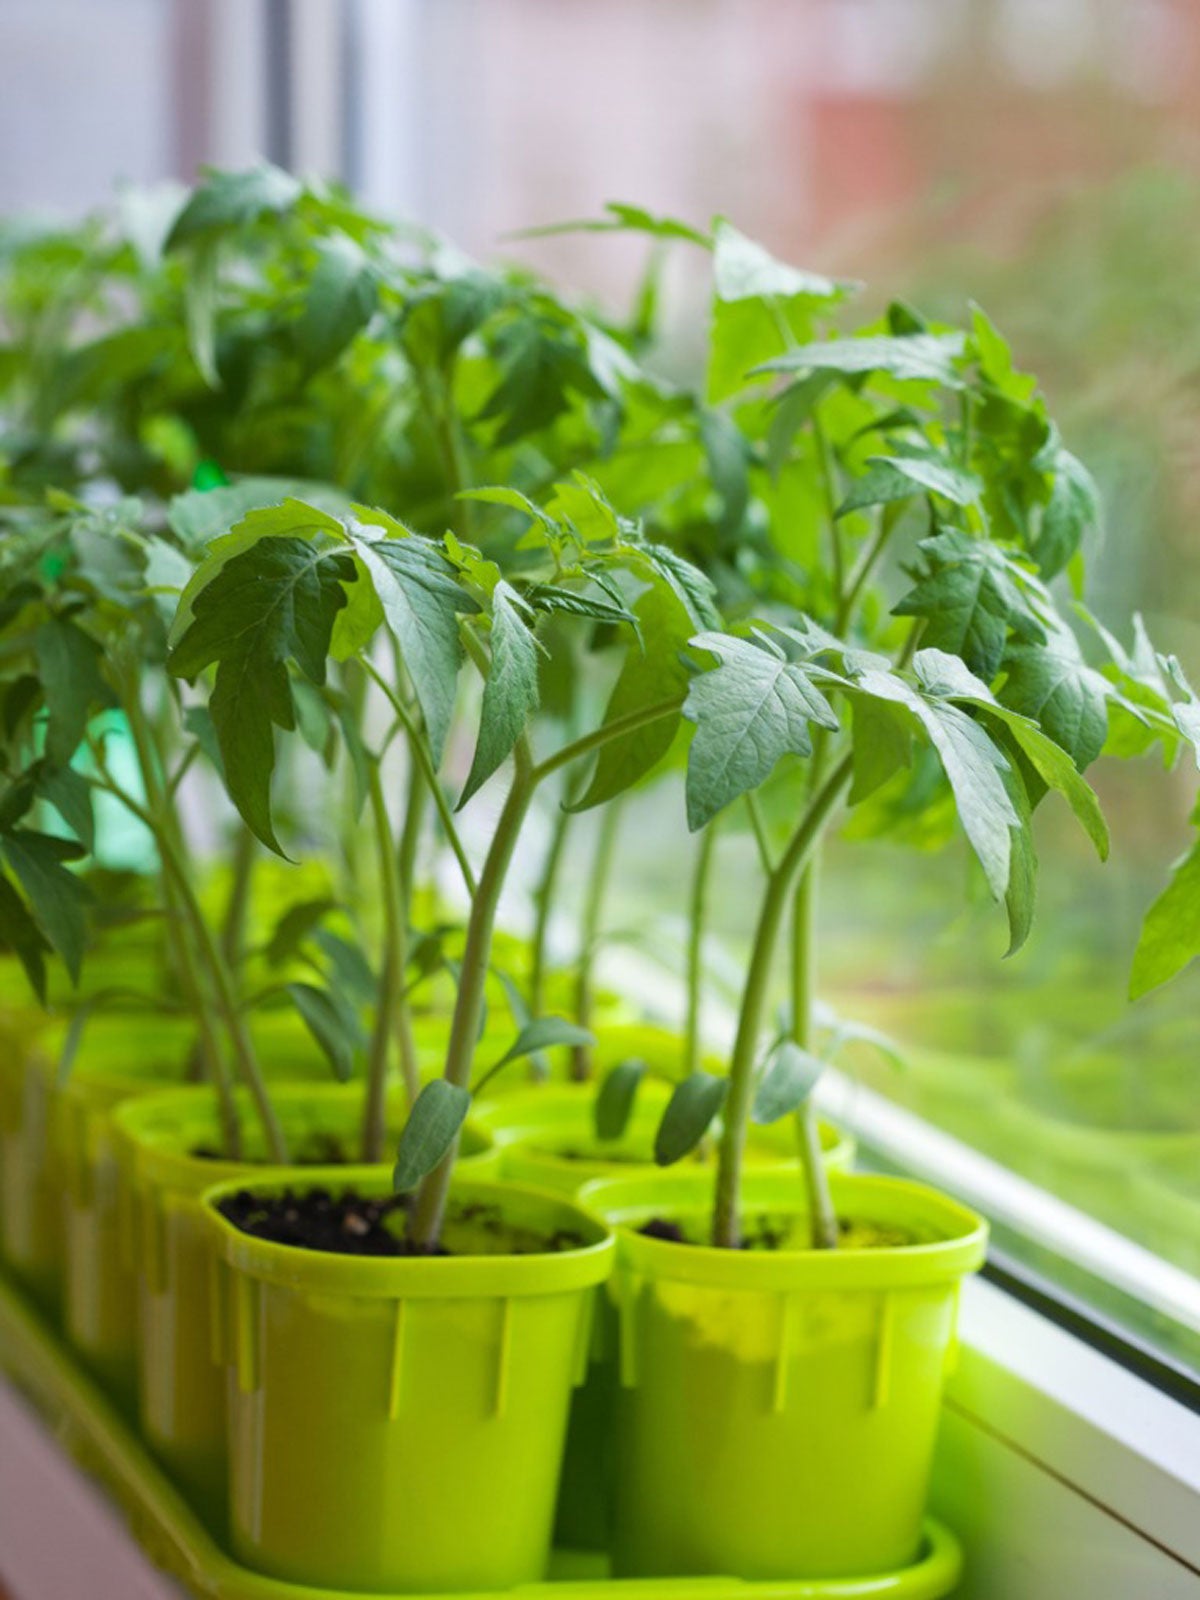 Tomato plant care during winter